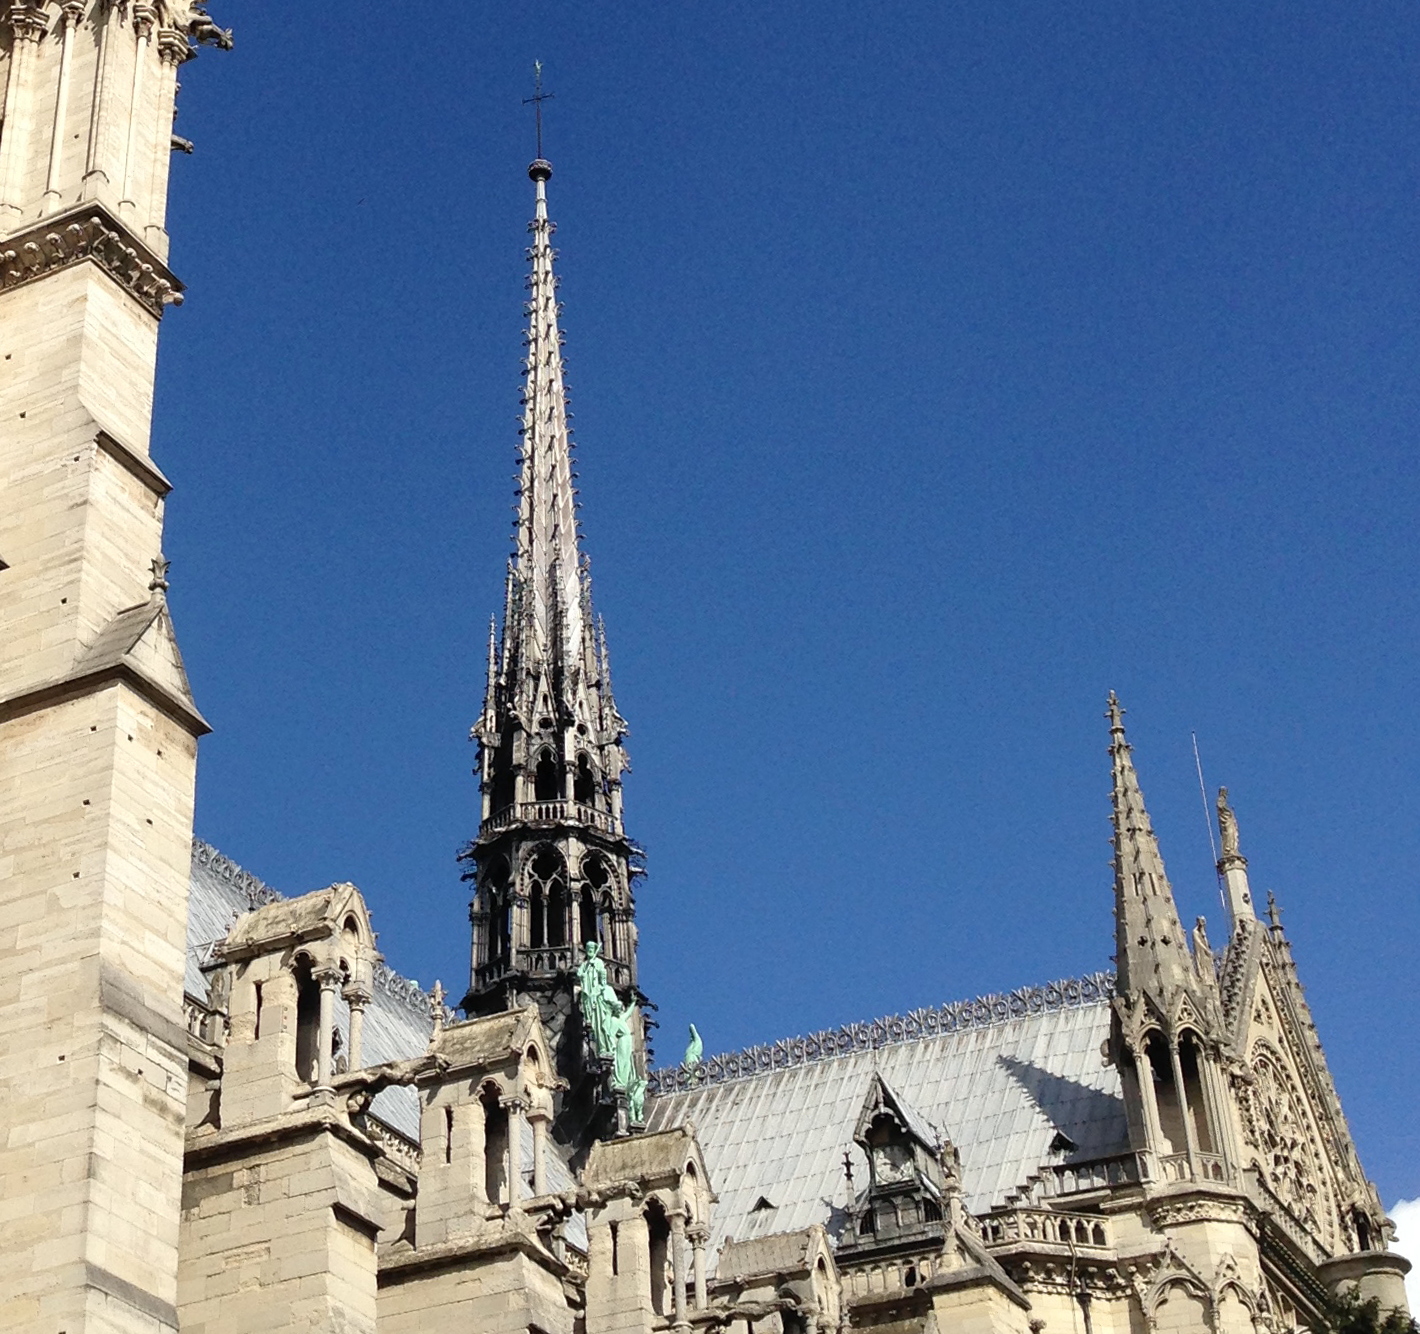 The spire and the roof of Notre-Dame de Paris, lost in the fire on 15 April 2019